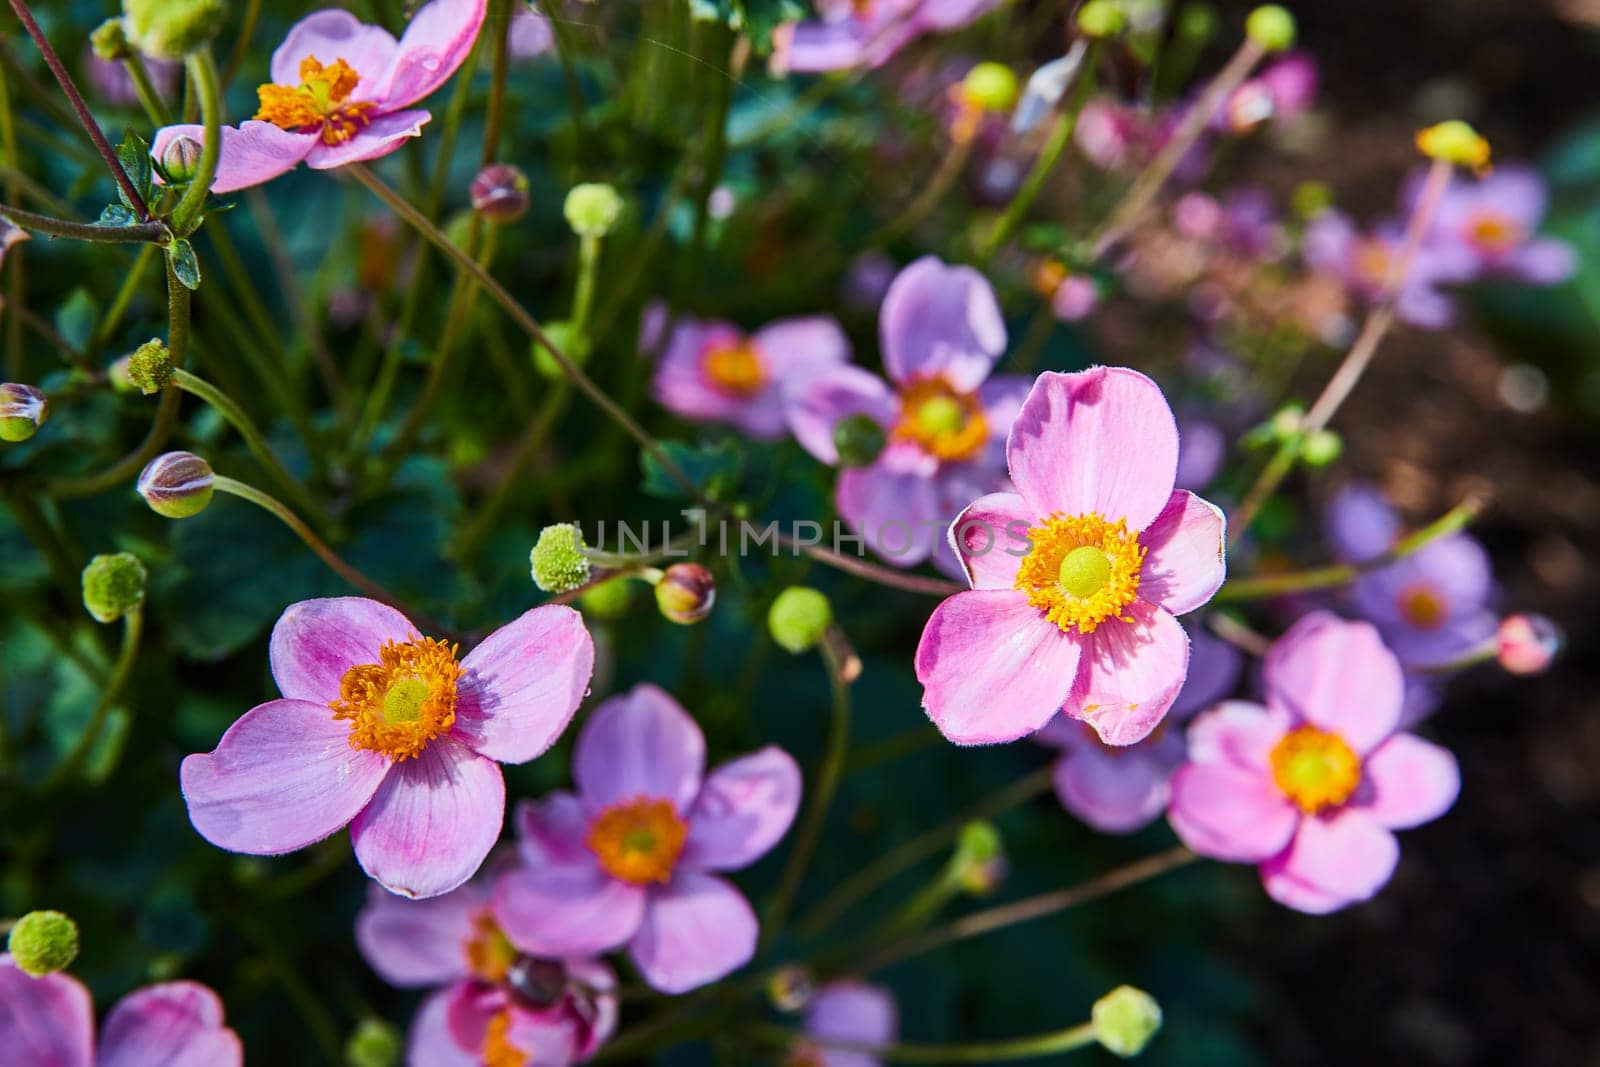 Vibrant Japanese Anemone Cluster with Lush Foliage Close-Up by njproductions